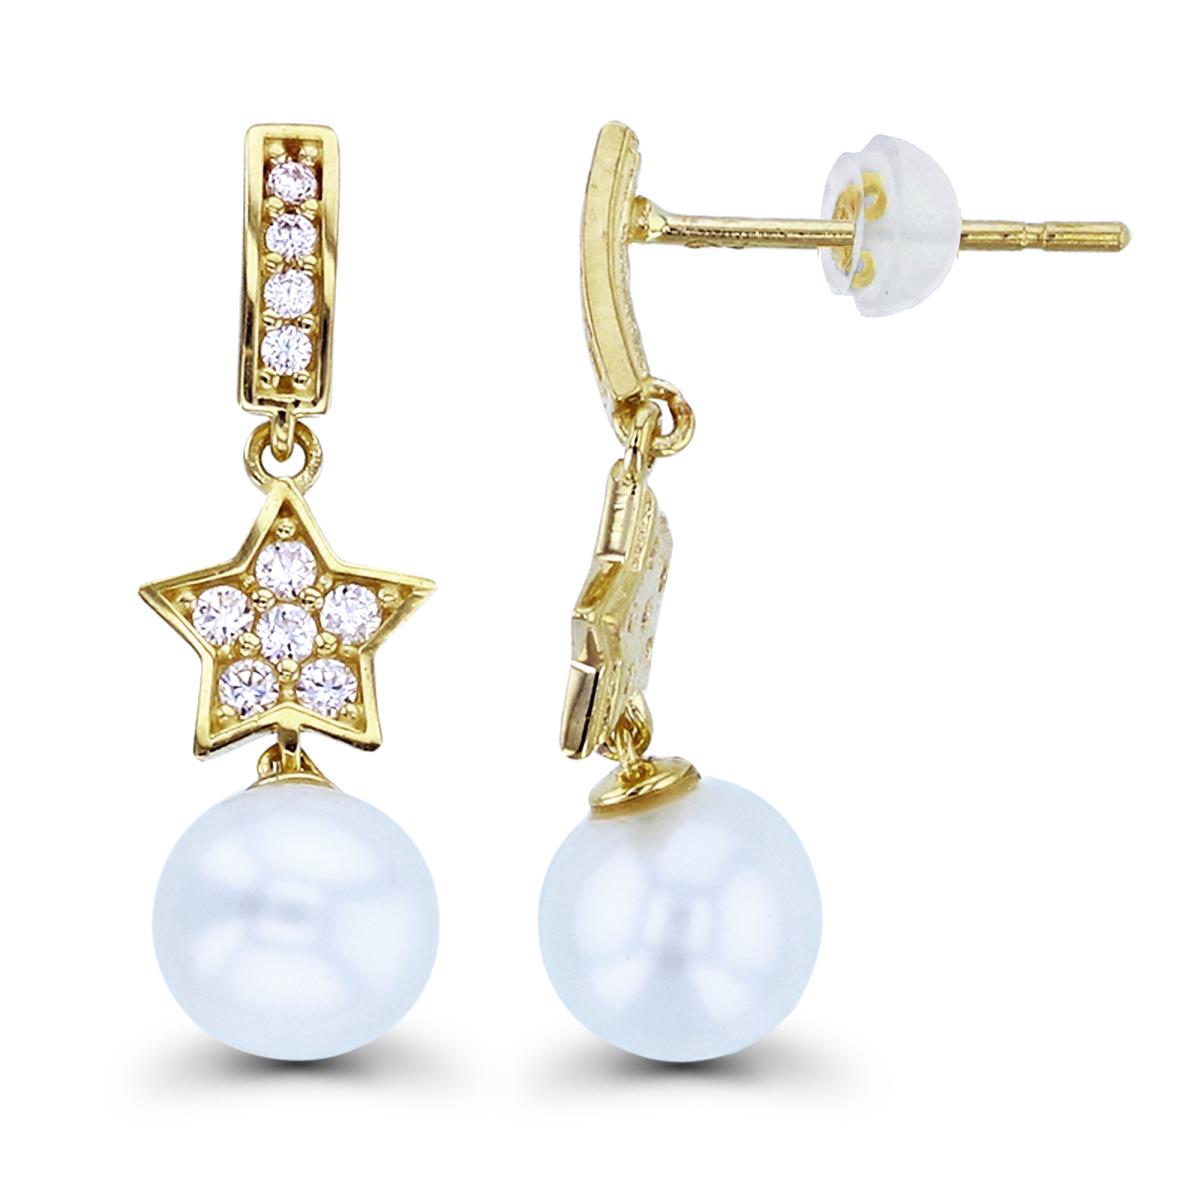 10K Yellow Gold 5mm Fresh Water Pearl & Rnd CZ Pave Star Dangling Earrings with Silicon Backs